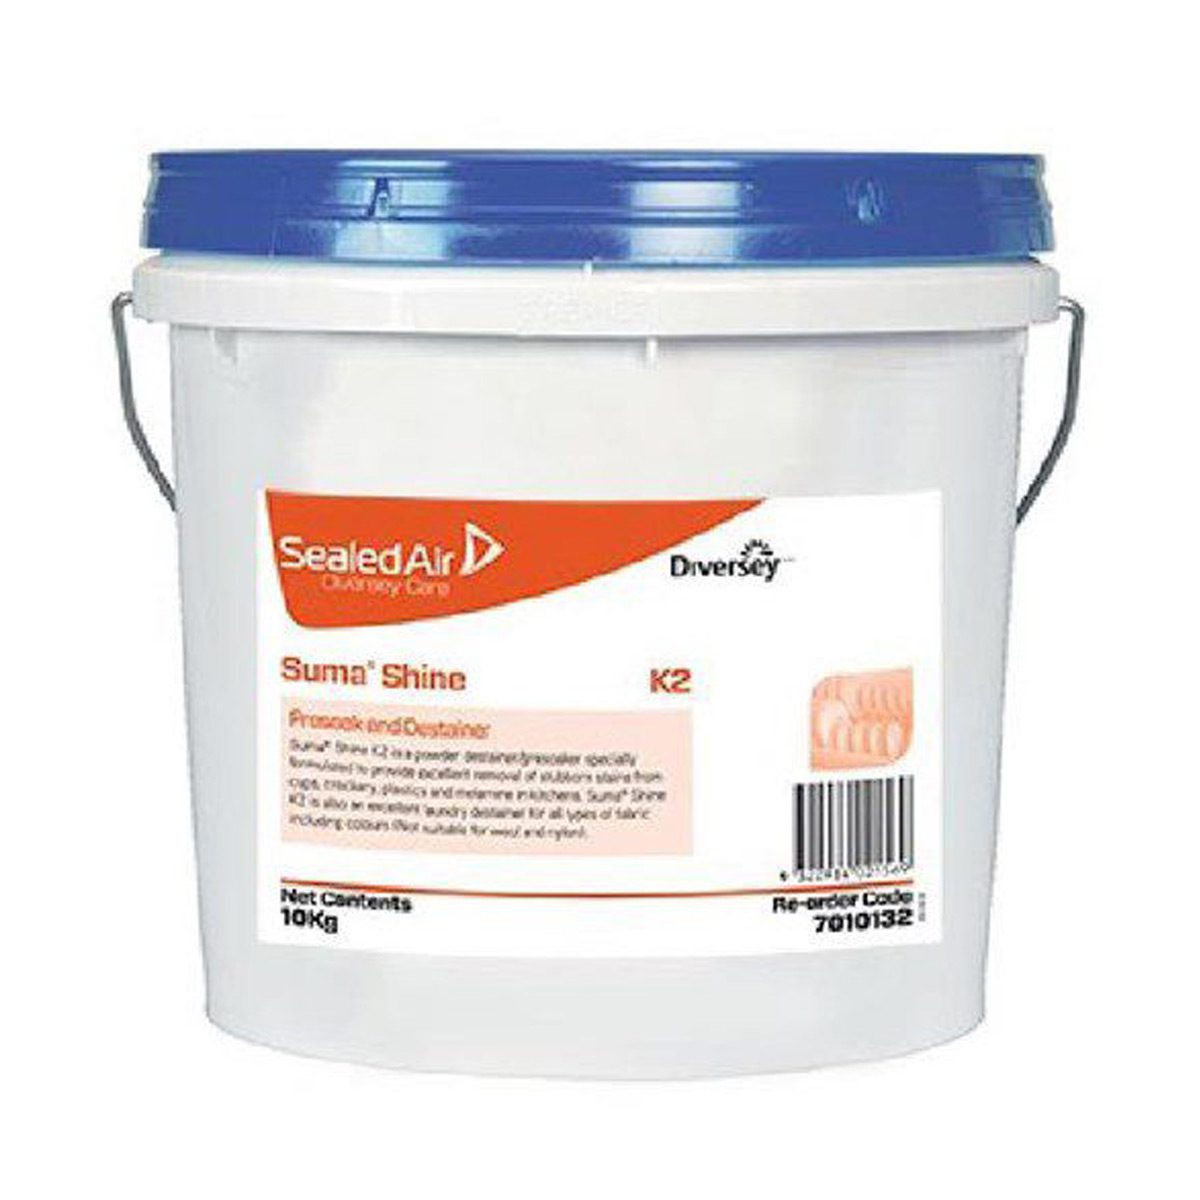 cleaning-products-laundry-diversey-suma-shine-k2-10kg-pre-soak-removes-stubborn-stains-soiling-cups-crockery-provides-effective-removal-even-on-heavily-soiled-substrates-vjs-distributors-7010132